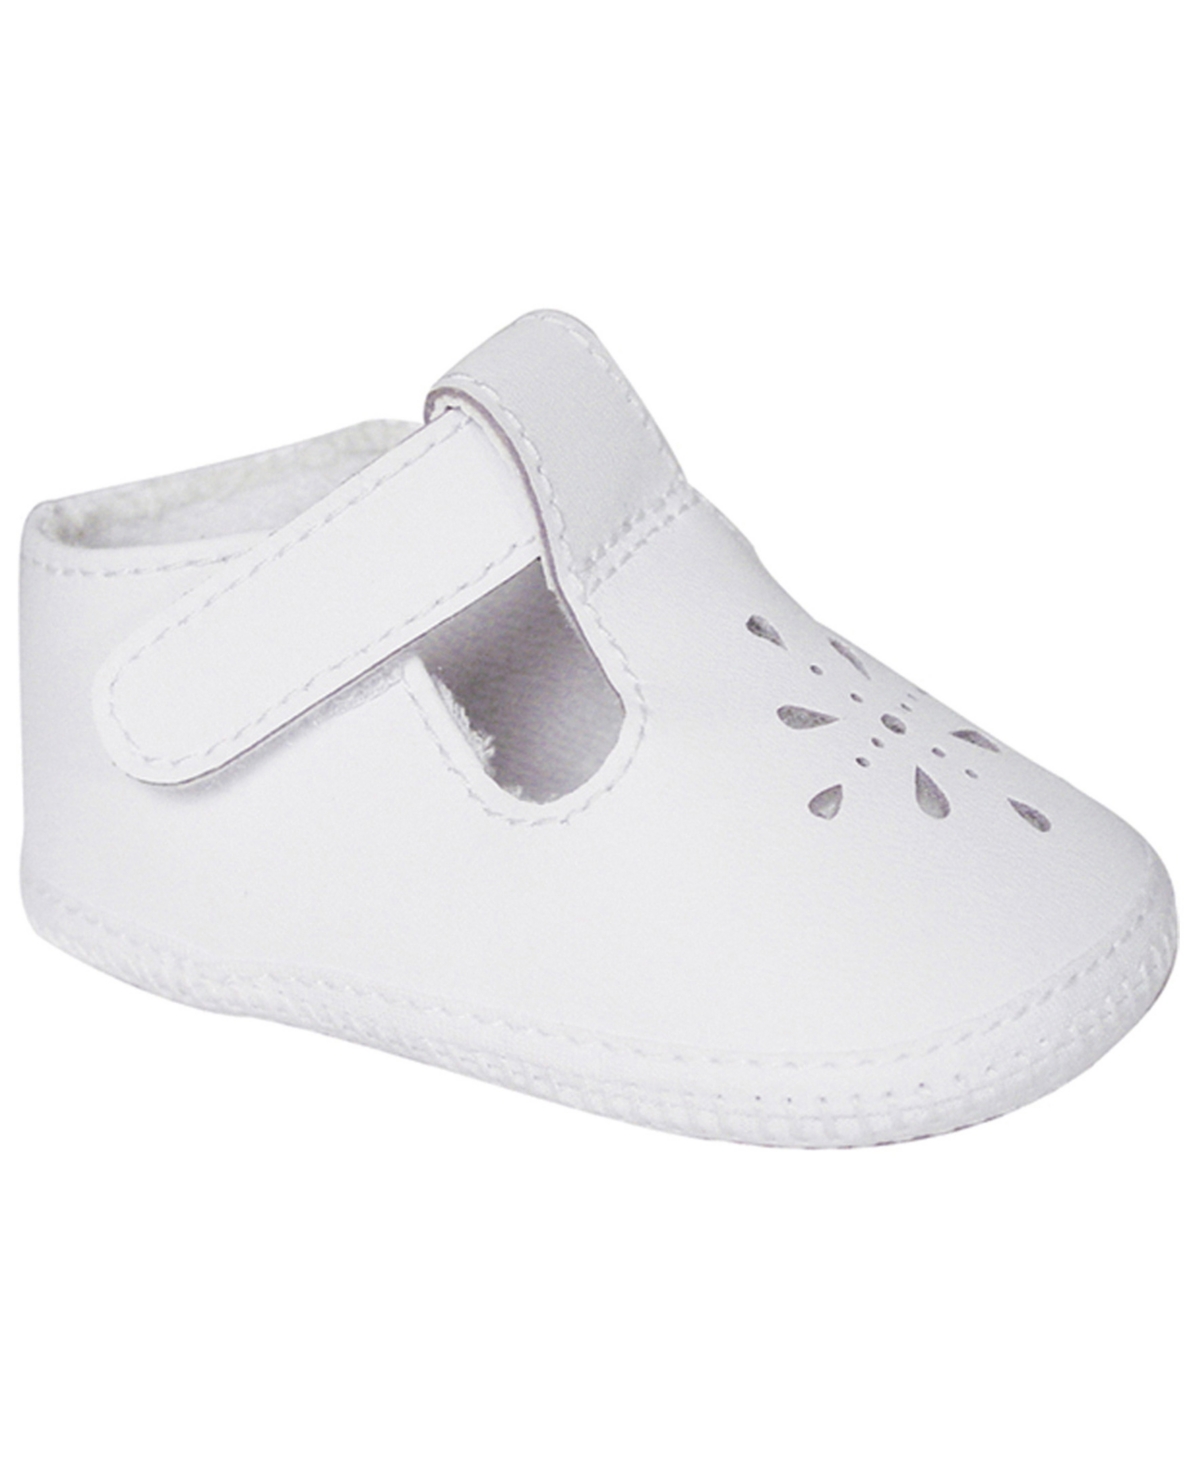 Baby Deer Baby Girl Leather T-strap Crib Shoe With Perforations In White